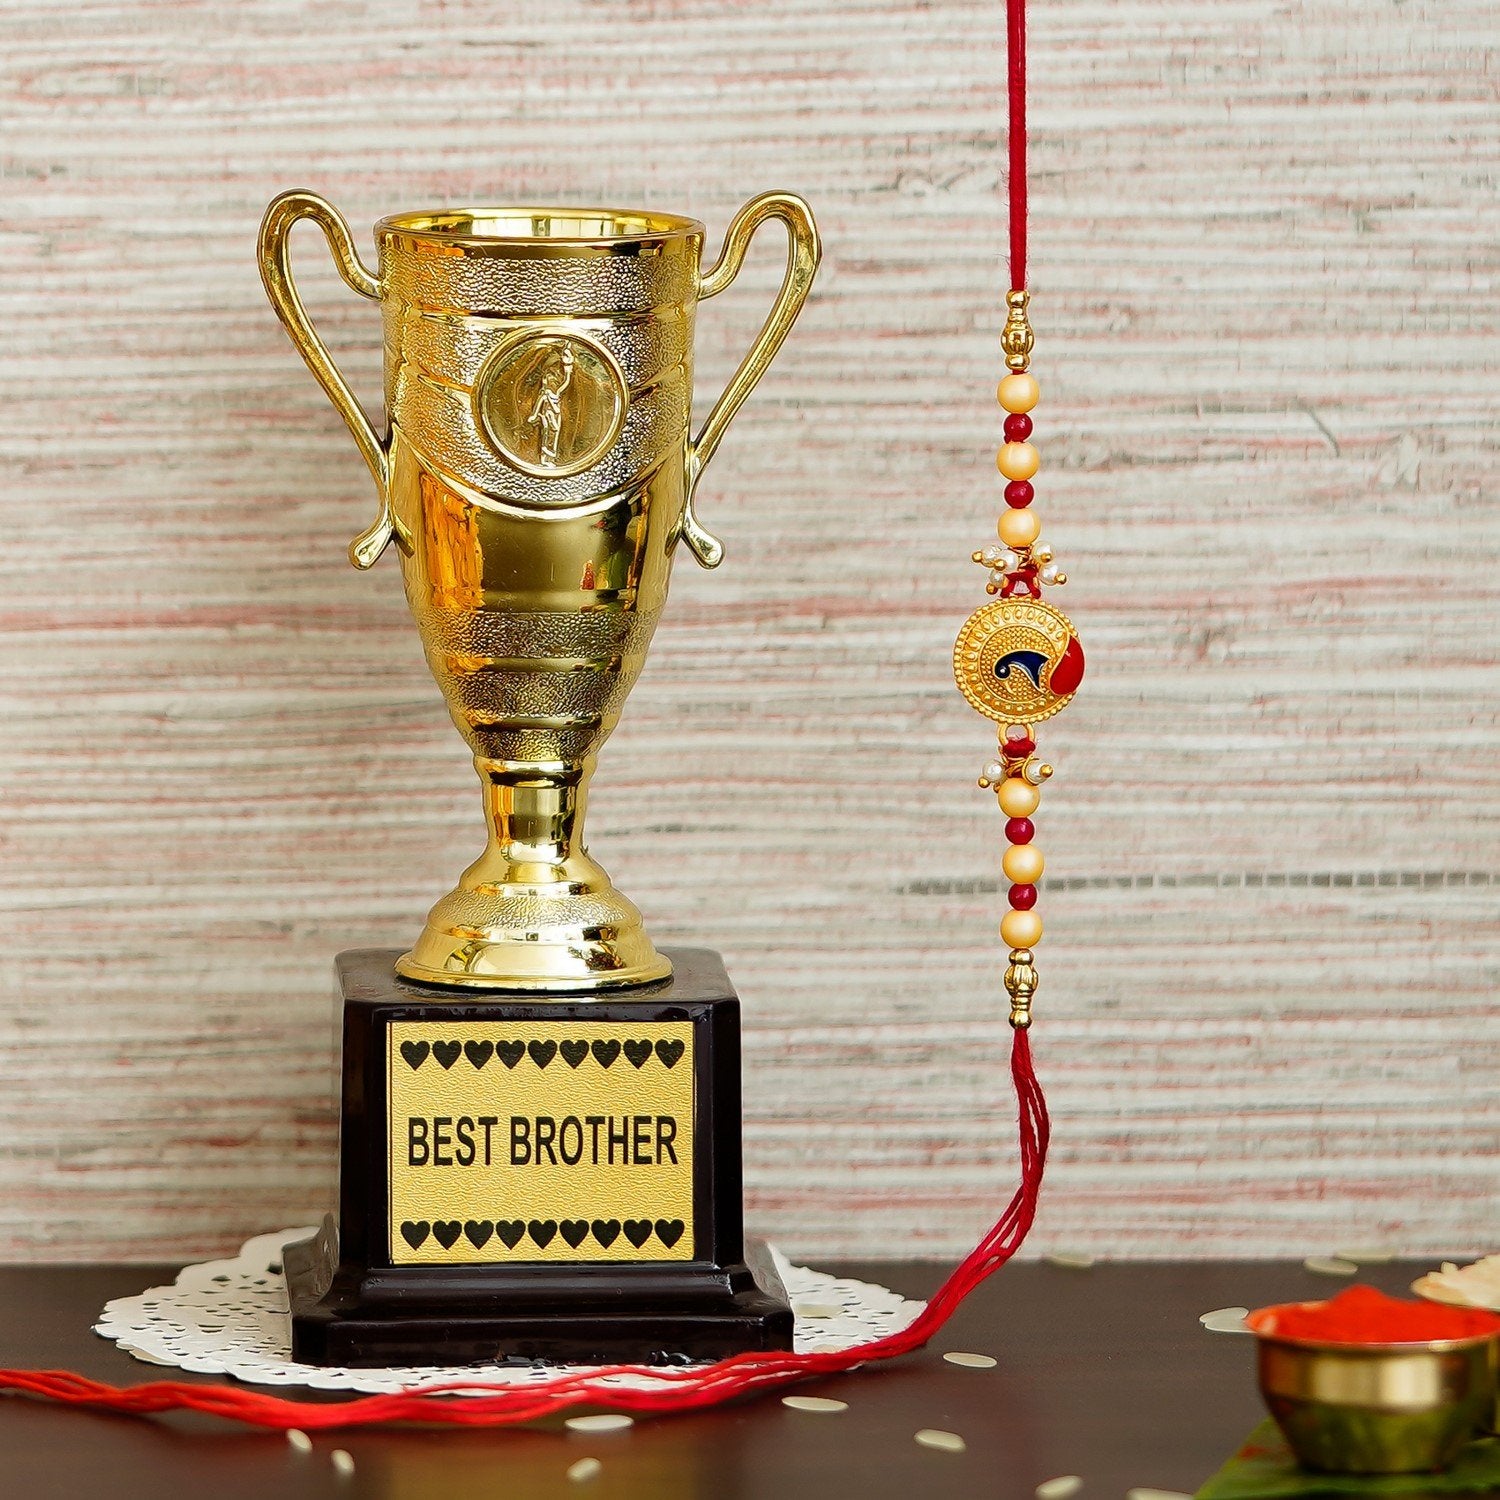 Designer Peacock Rakhi with Best Brother Trophy and Roli Chawal Pack